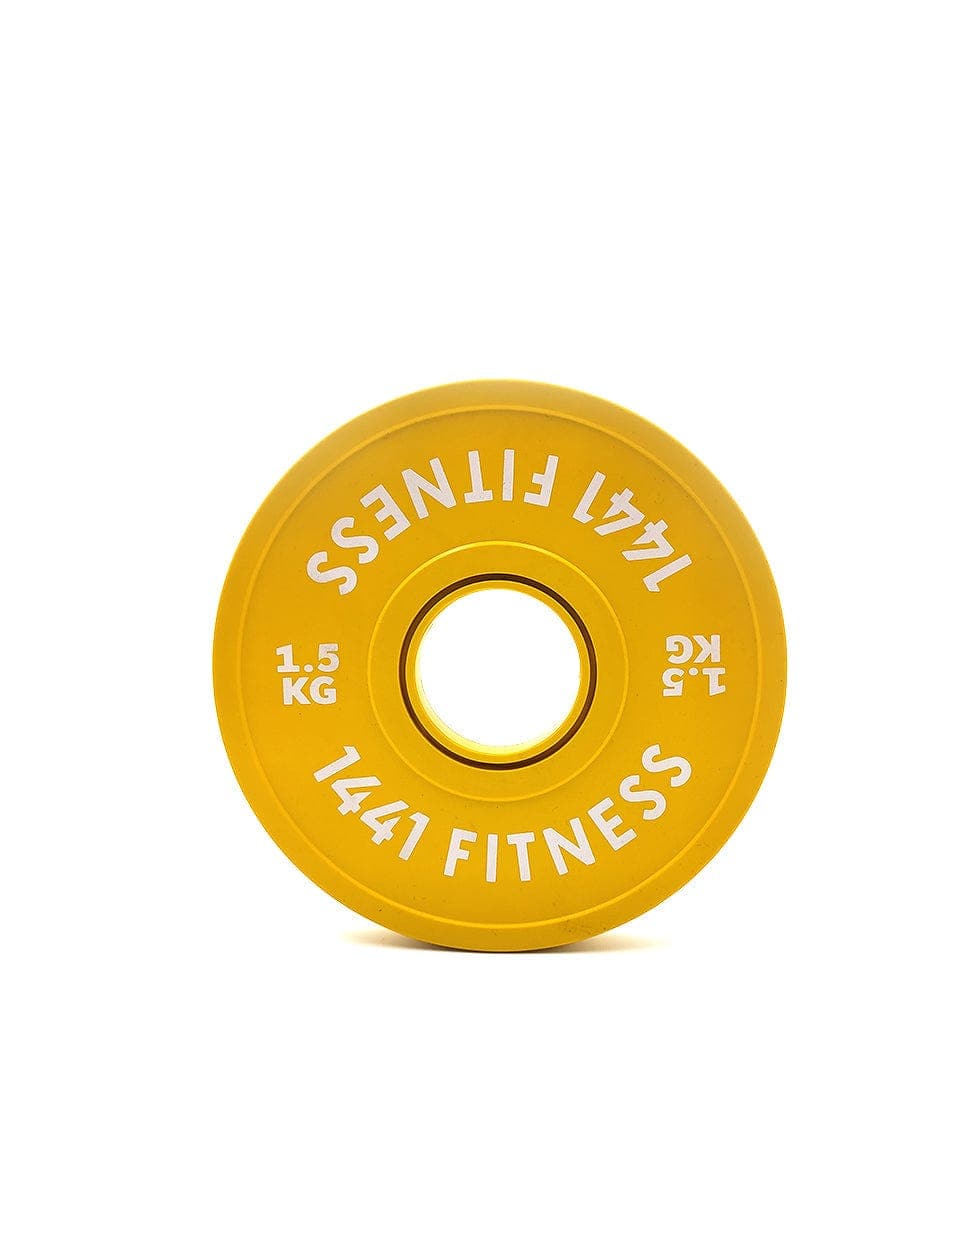 PRSAE Plates & Bars 1.5 KG 1441 Fitness Fractional Bumper Weight Plates 0.5 kg to 2.5 Kg - Sold as Per Piece